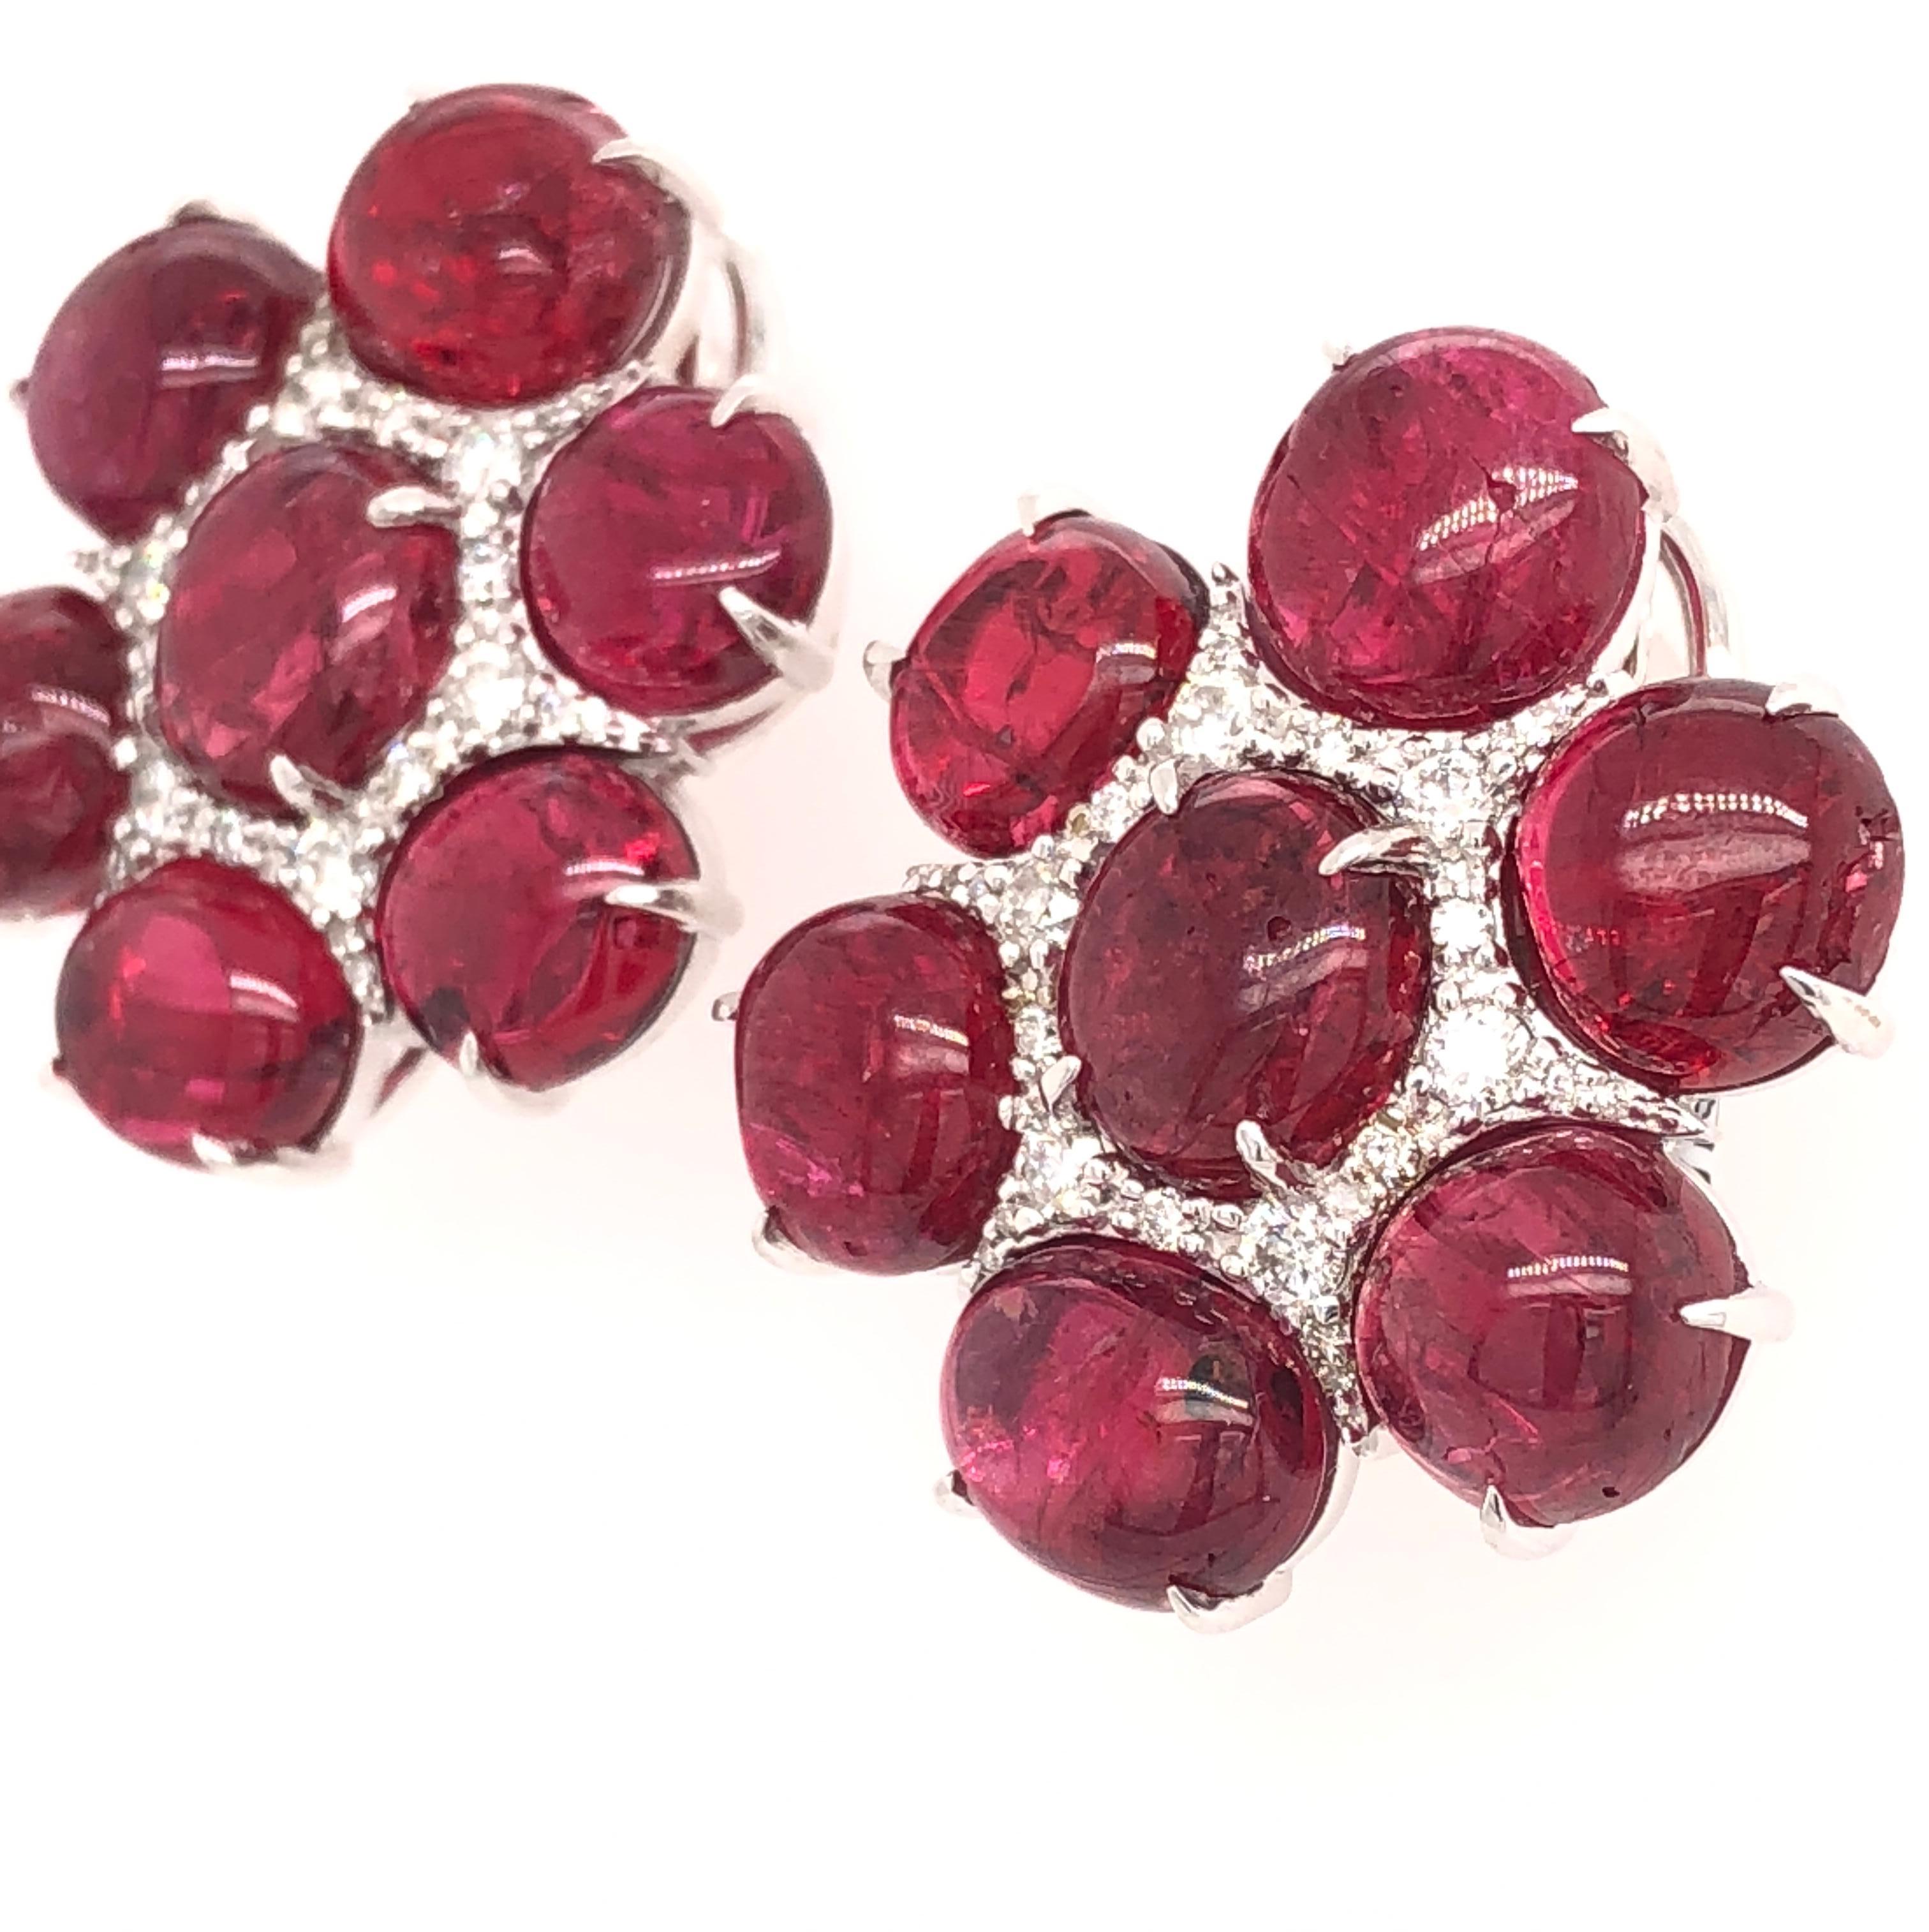 18K White Gold.
Spinel: 31.20ct total weight.
Diamonds: 0.56ct total weight.
All diamonds are G-H/SI stones.
Width - is approximately 2.3cm/0.90inches.
Height - is approximately 2.7cm/1.07inches.